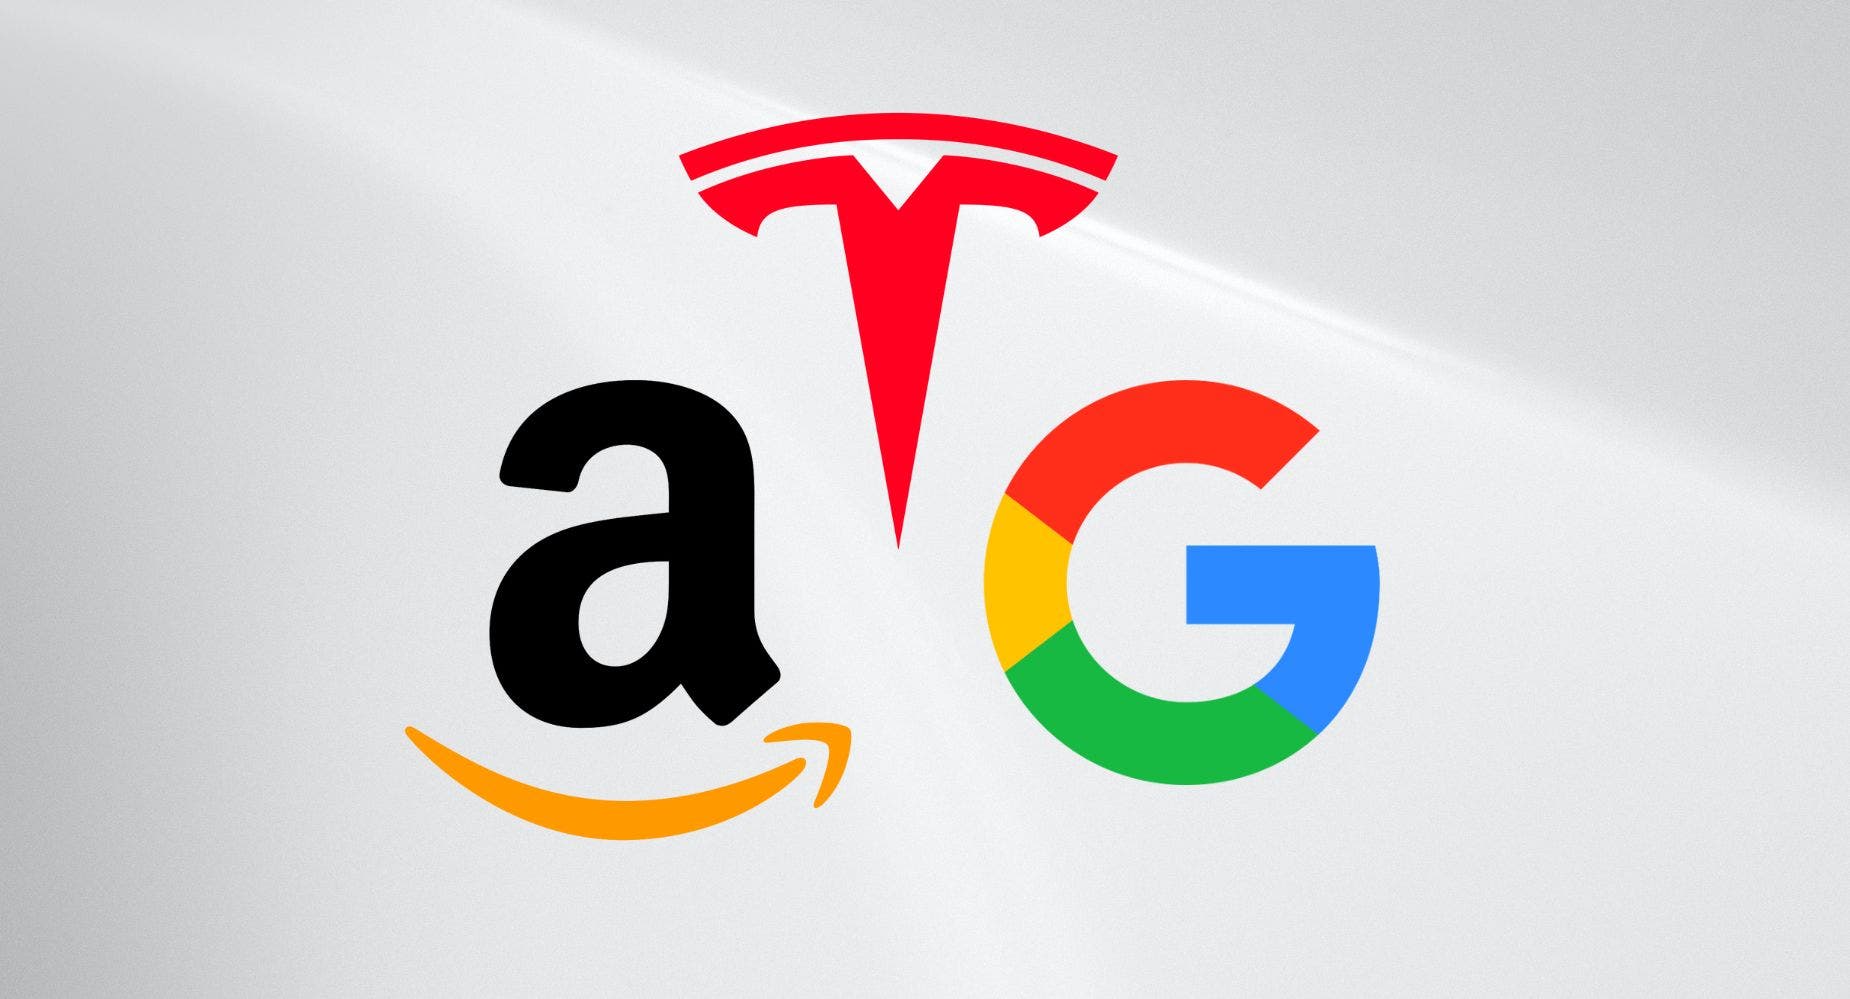 Ahead Of Tesla Share Split, Here's How Much $1,000 Invested In Amazon, Alphabet Before Their 2022 Stock Splits Would Be Worth Today